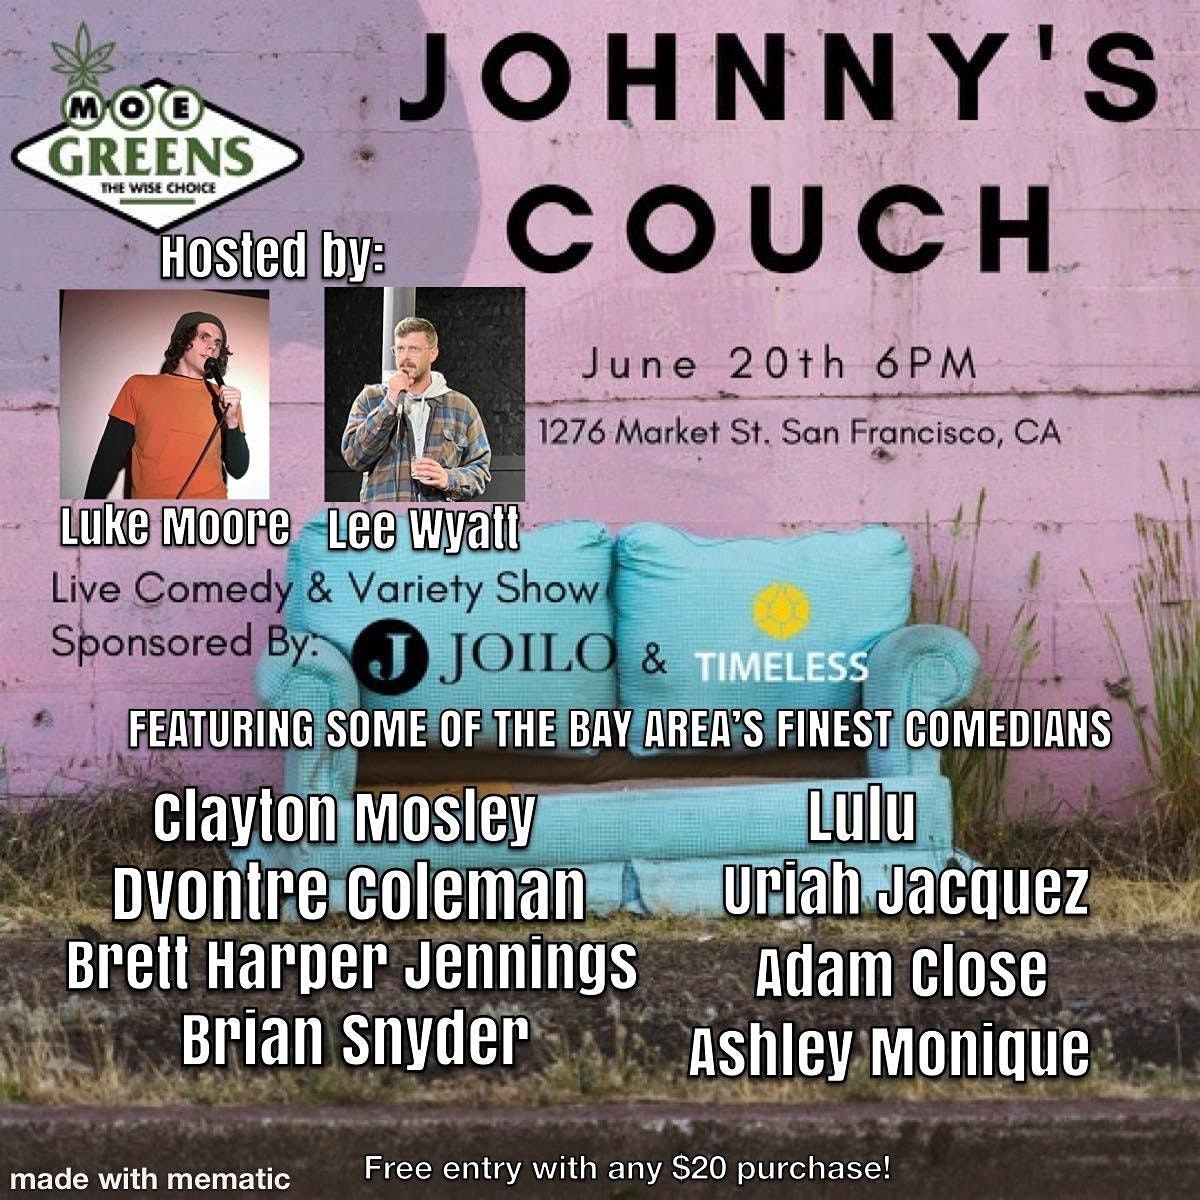 Johnny's Couch comedy show